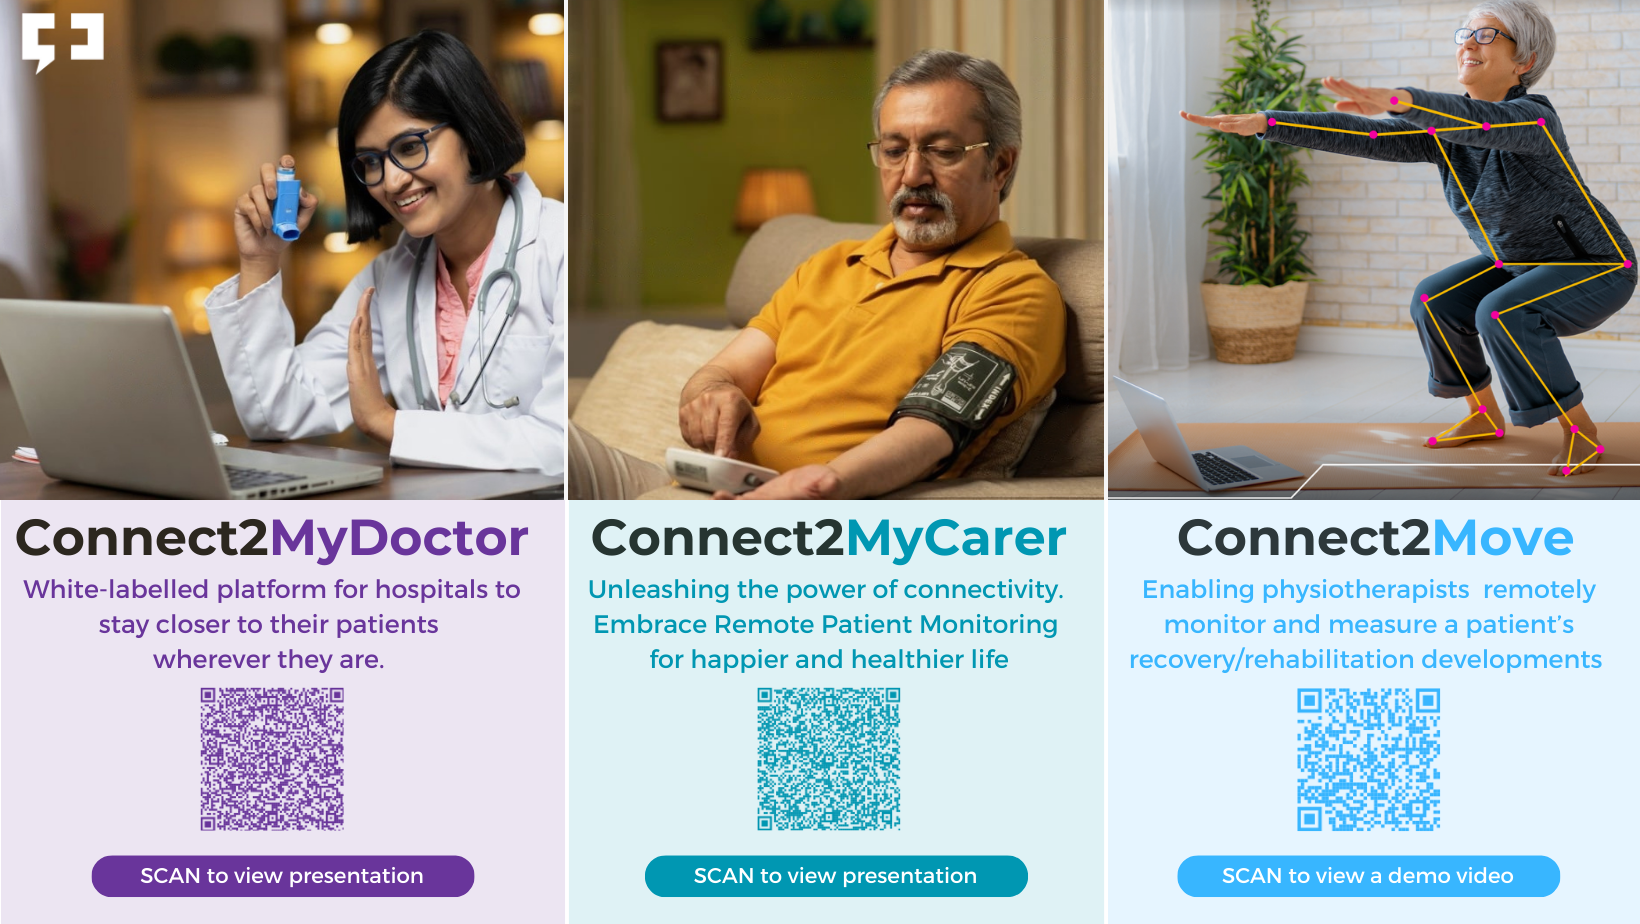 connect2mydoctor information